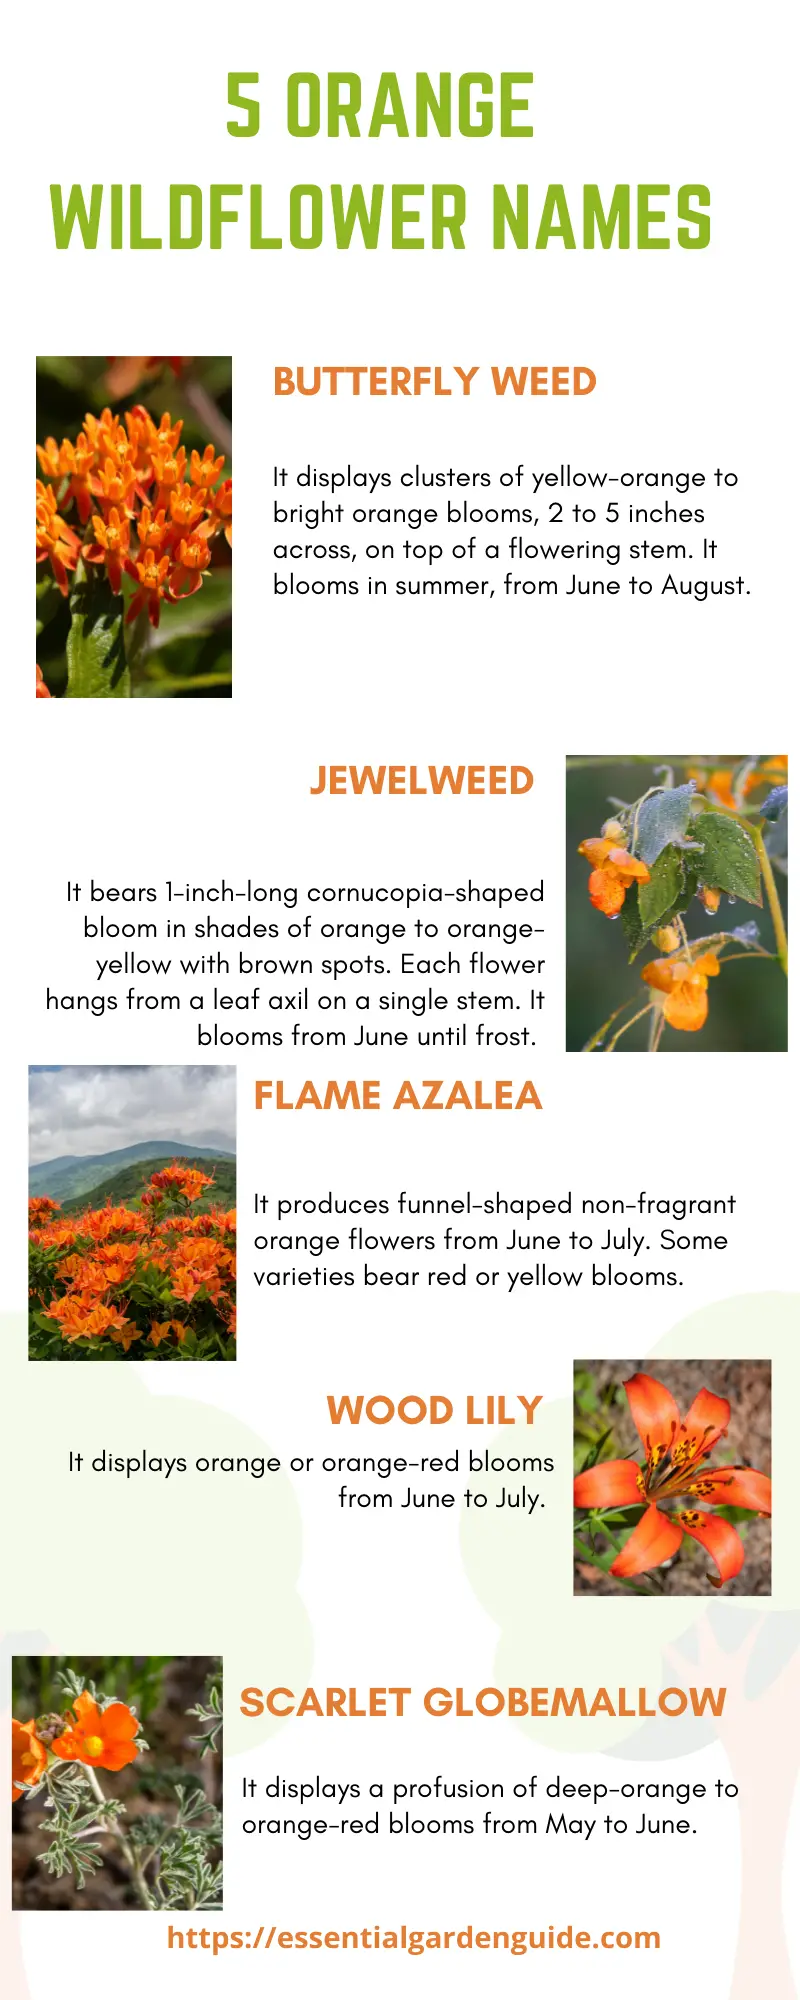 Names and pictures of 5 common orange flowers